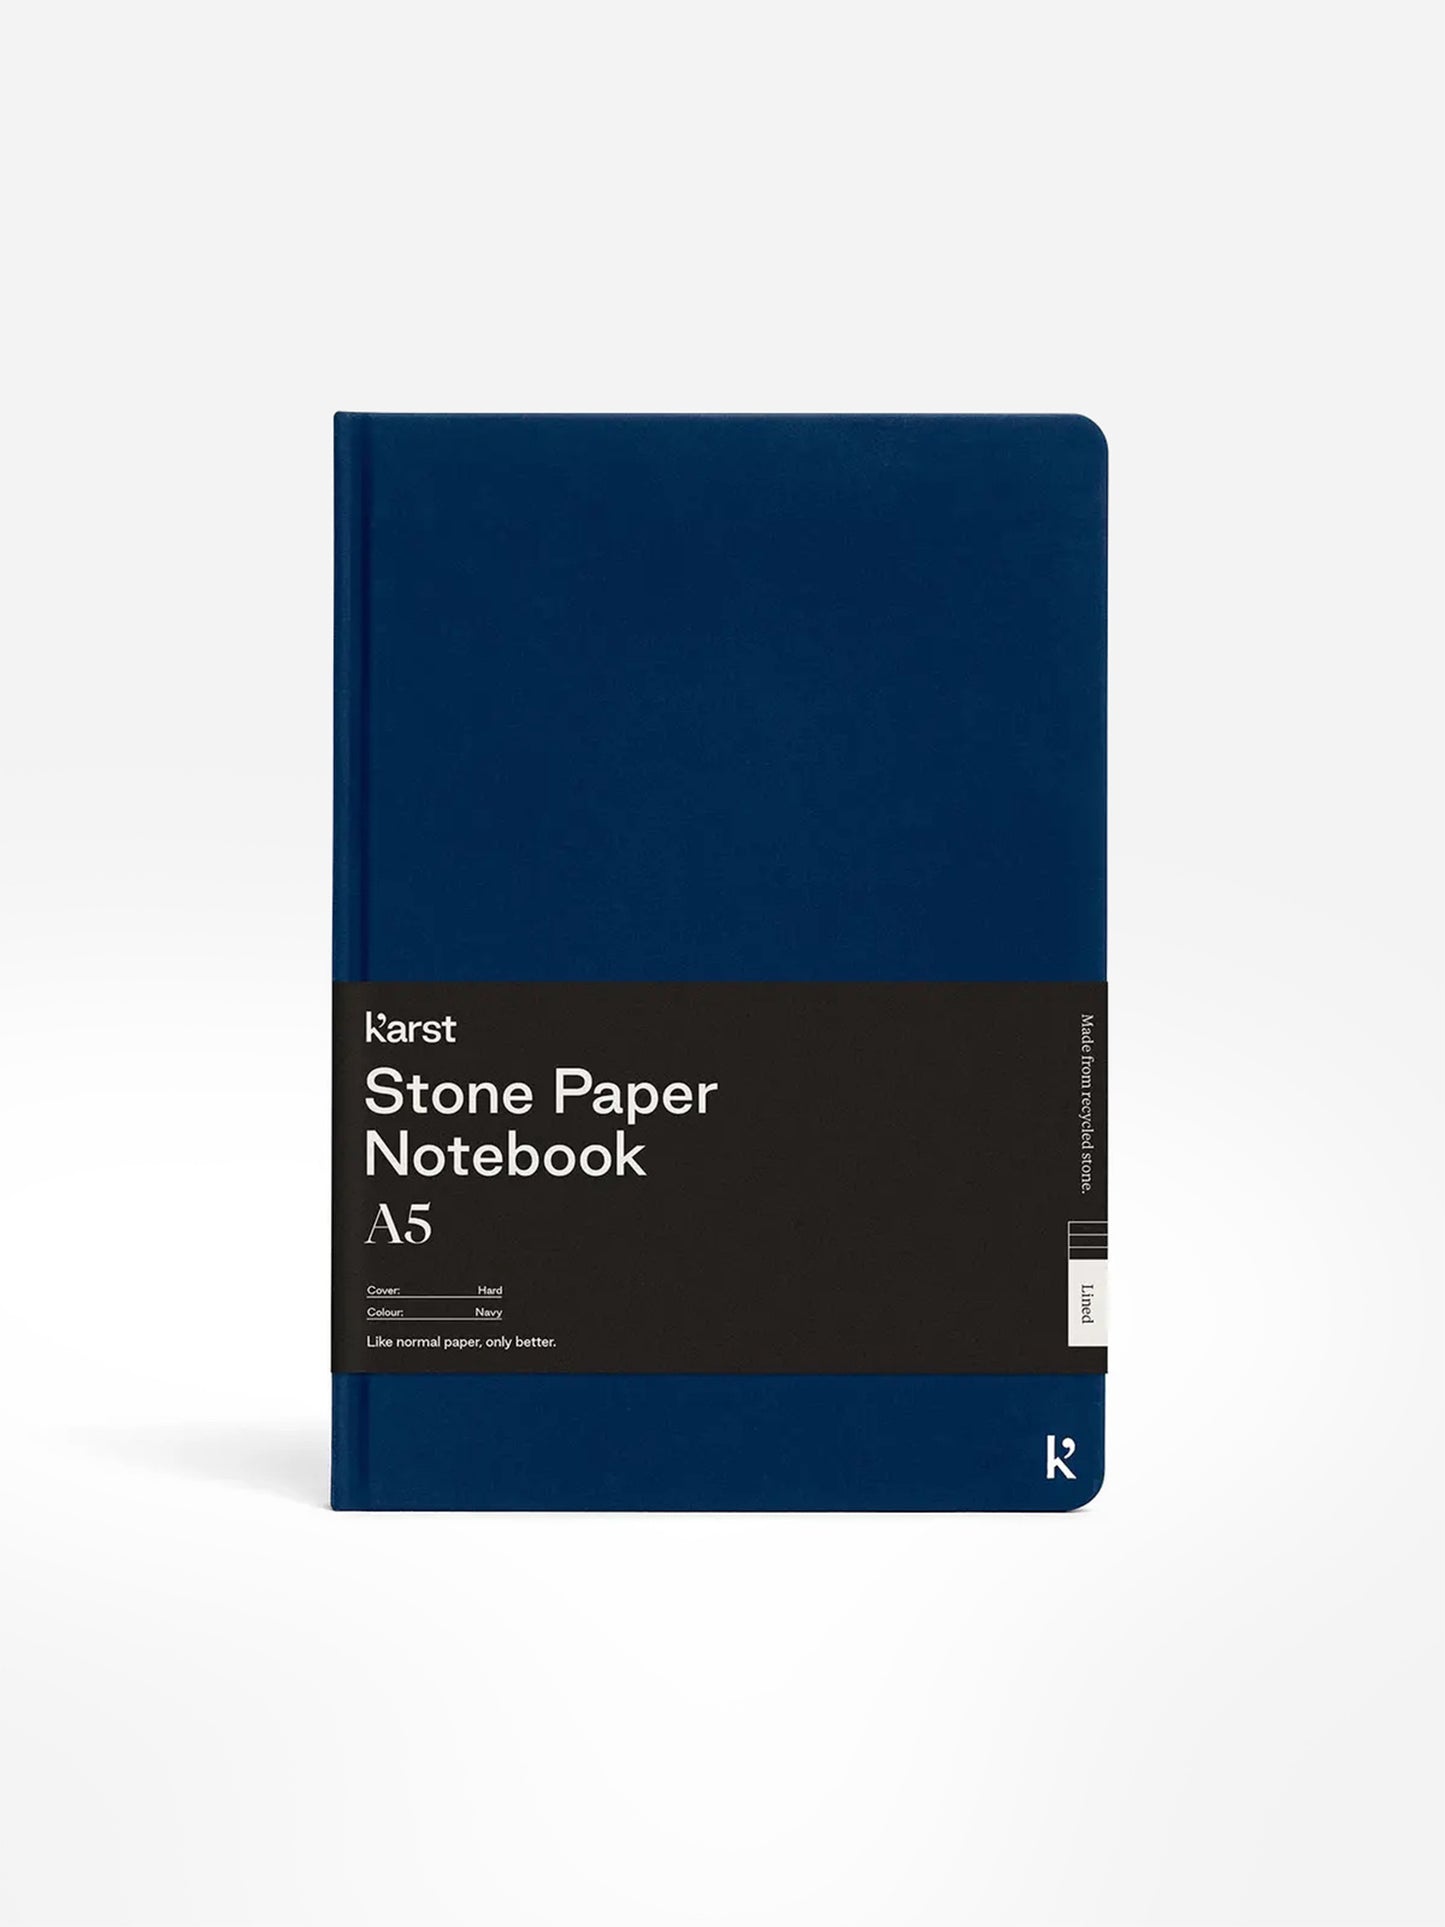 Karst Stone Paper A5 Hardcover Notebook